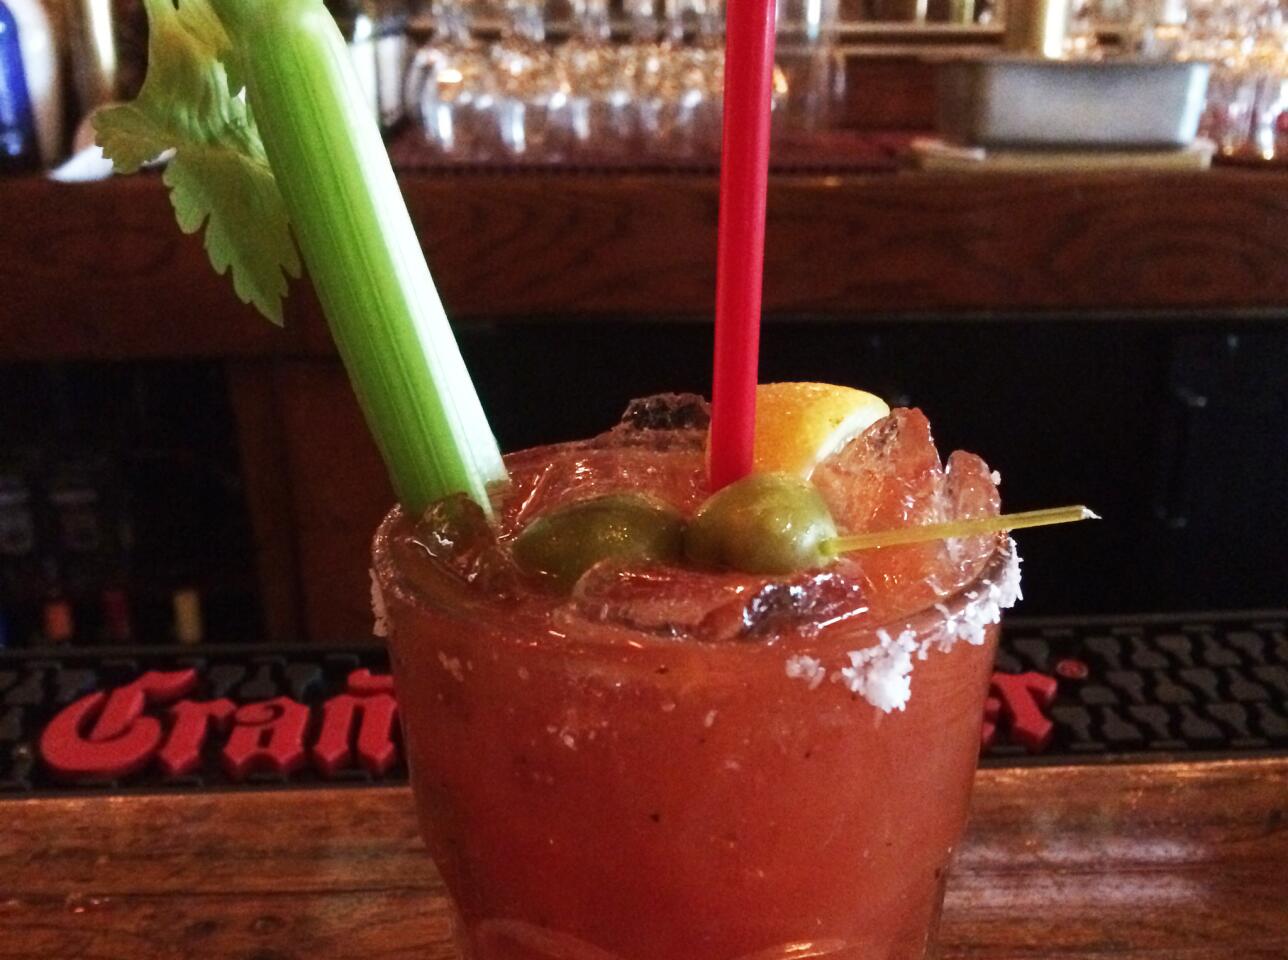 Where to get a great Bloody Mary